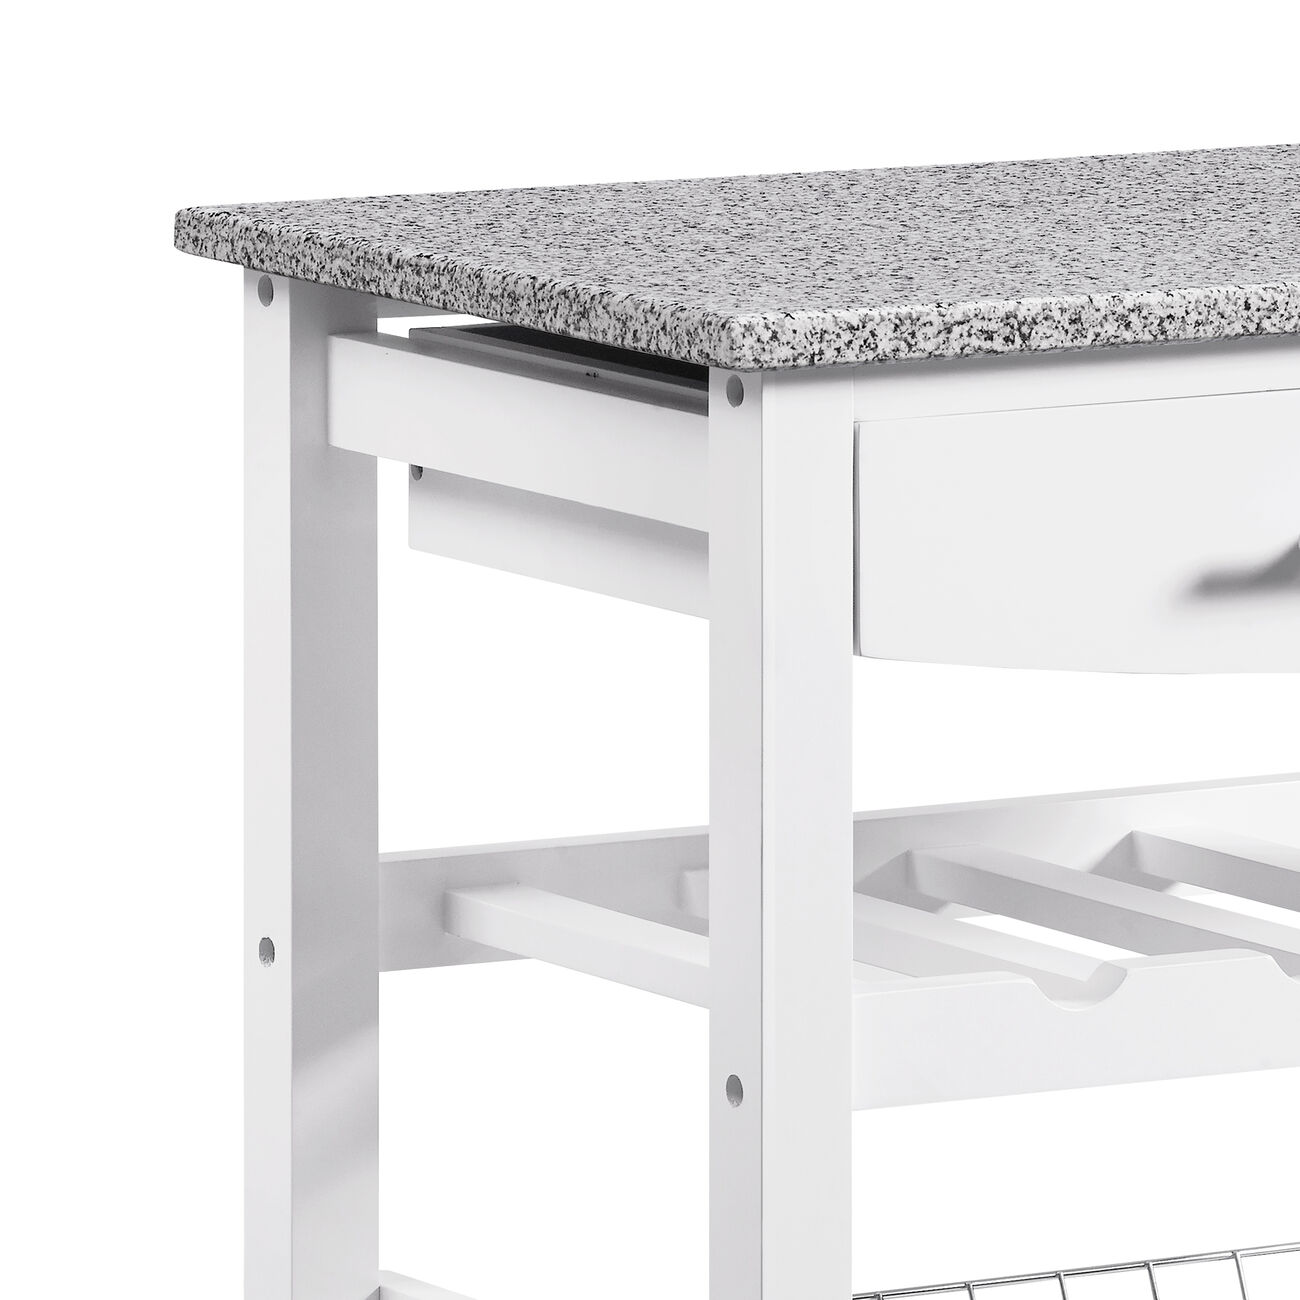 Contemporary Style Kitchen Island with Granite Top and Casters, White